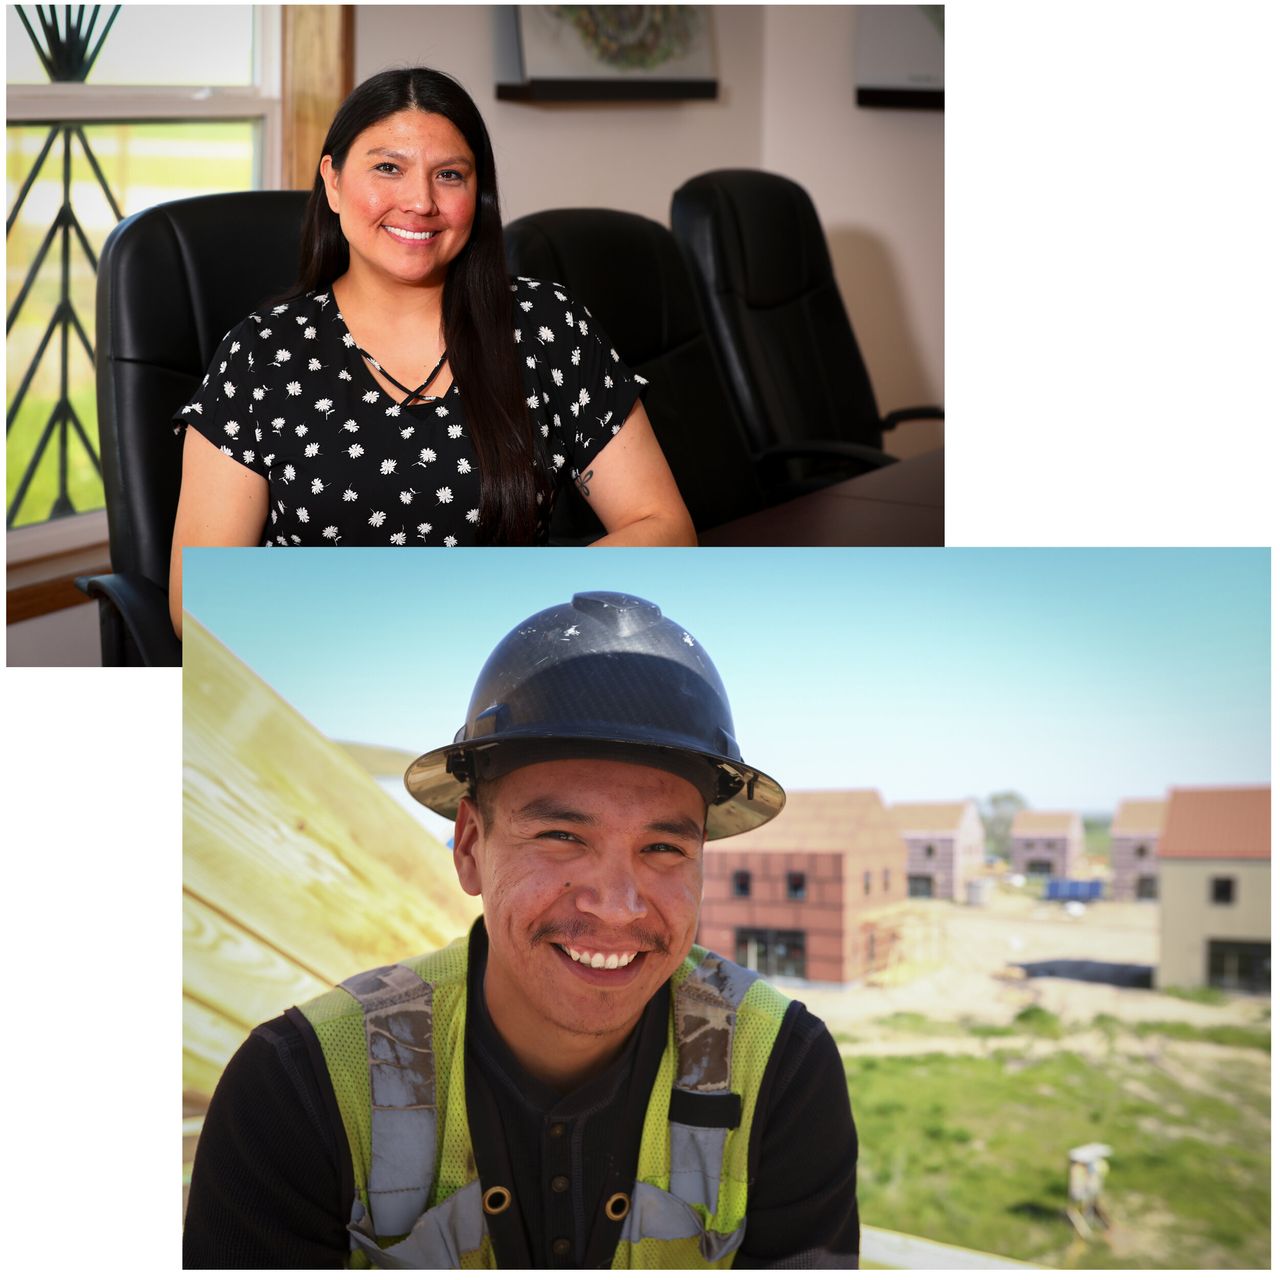 TOP: Tatewin Means, executive director of the Thunder Valley Community Development Corporation. BOTTOM: Alan Jealous, co-owner of Thikaga Construction, stands in front of housing units his company is building for Thunder Valley CDC on the Pine Ridge Reservation.